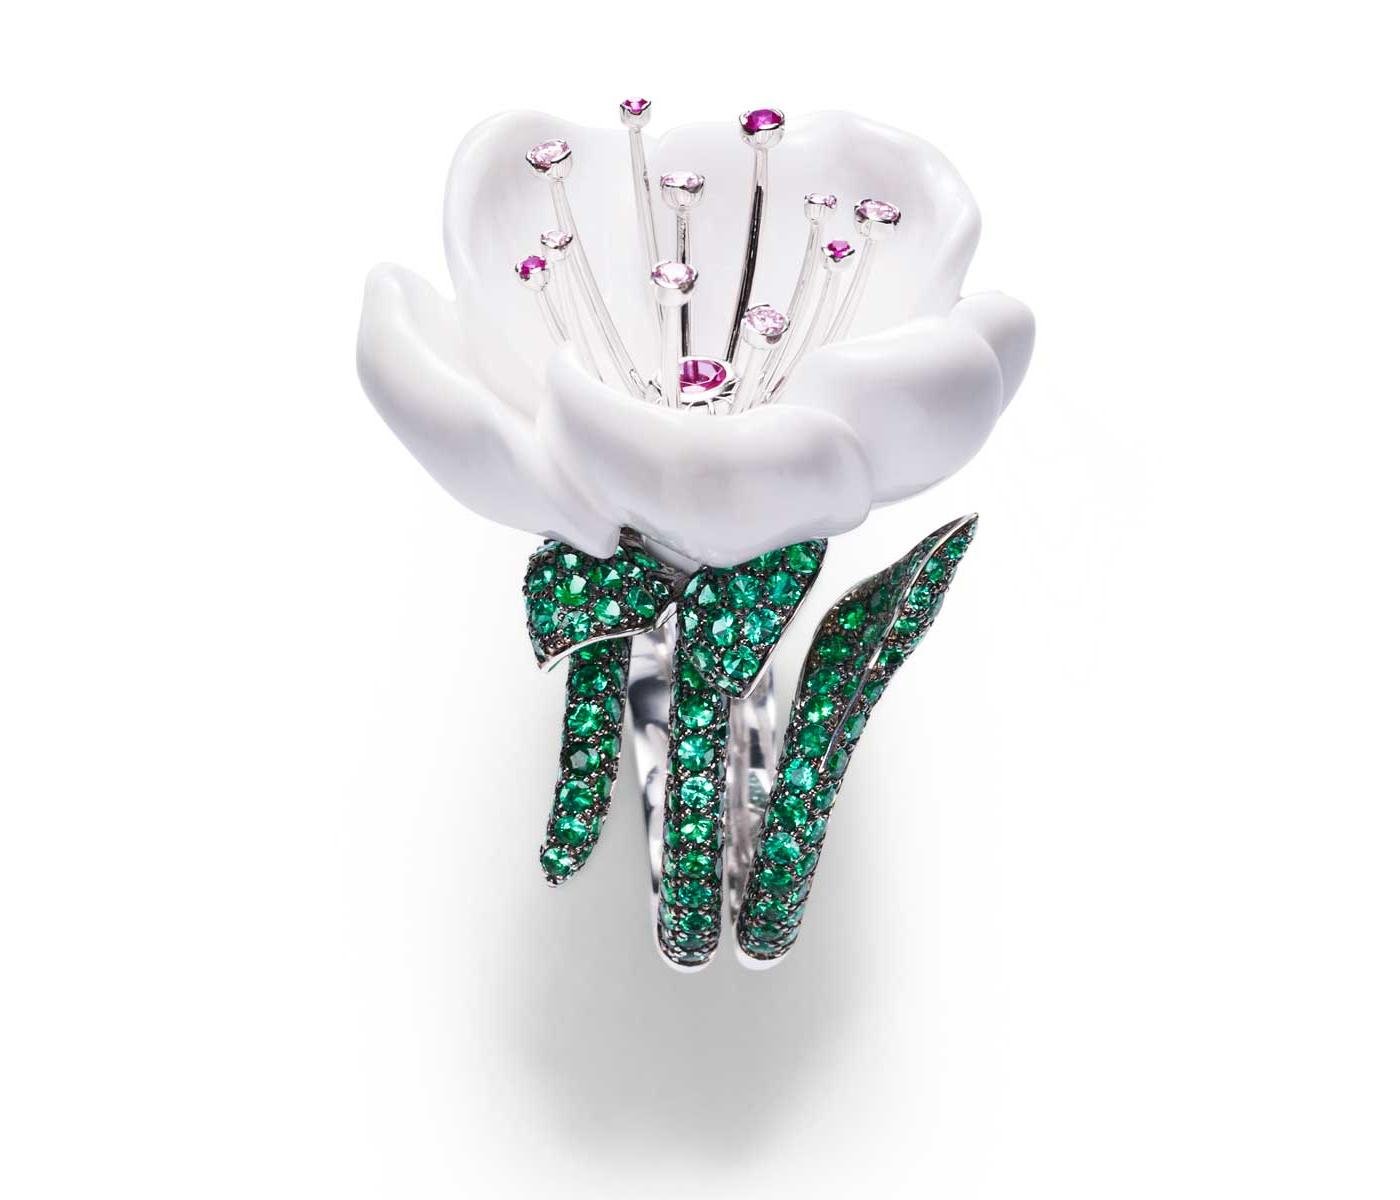 Ring by Piaget